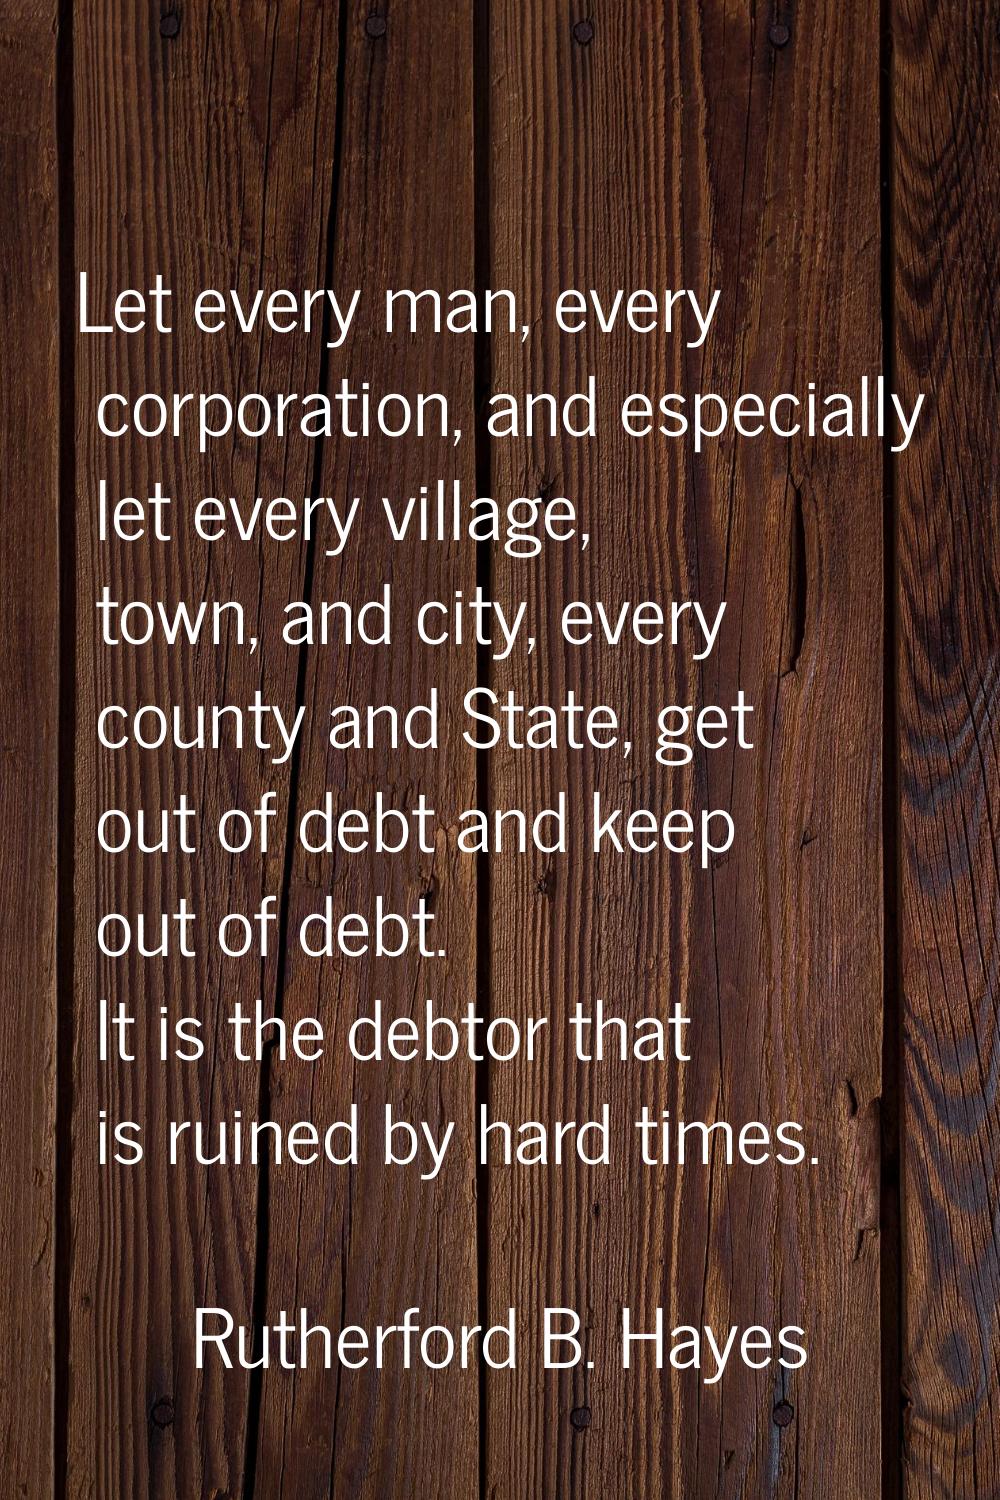 Let every man, every corporation, and especially let every village, town, and city, every county an